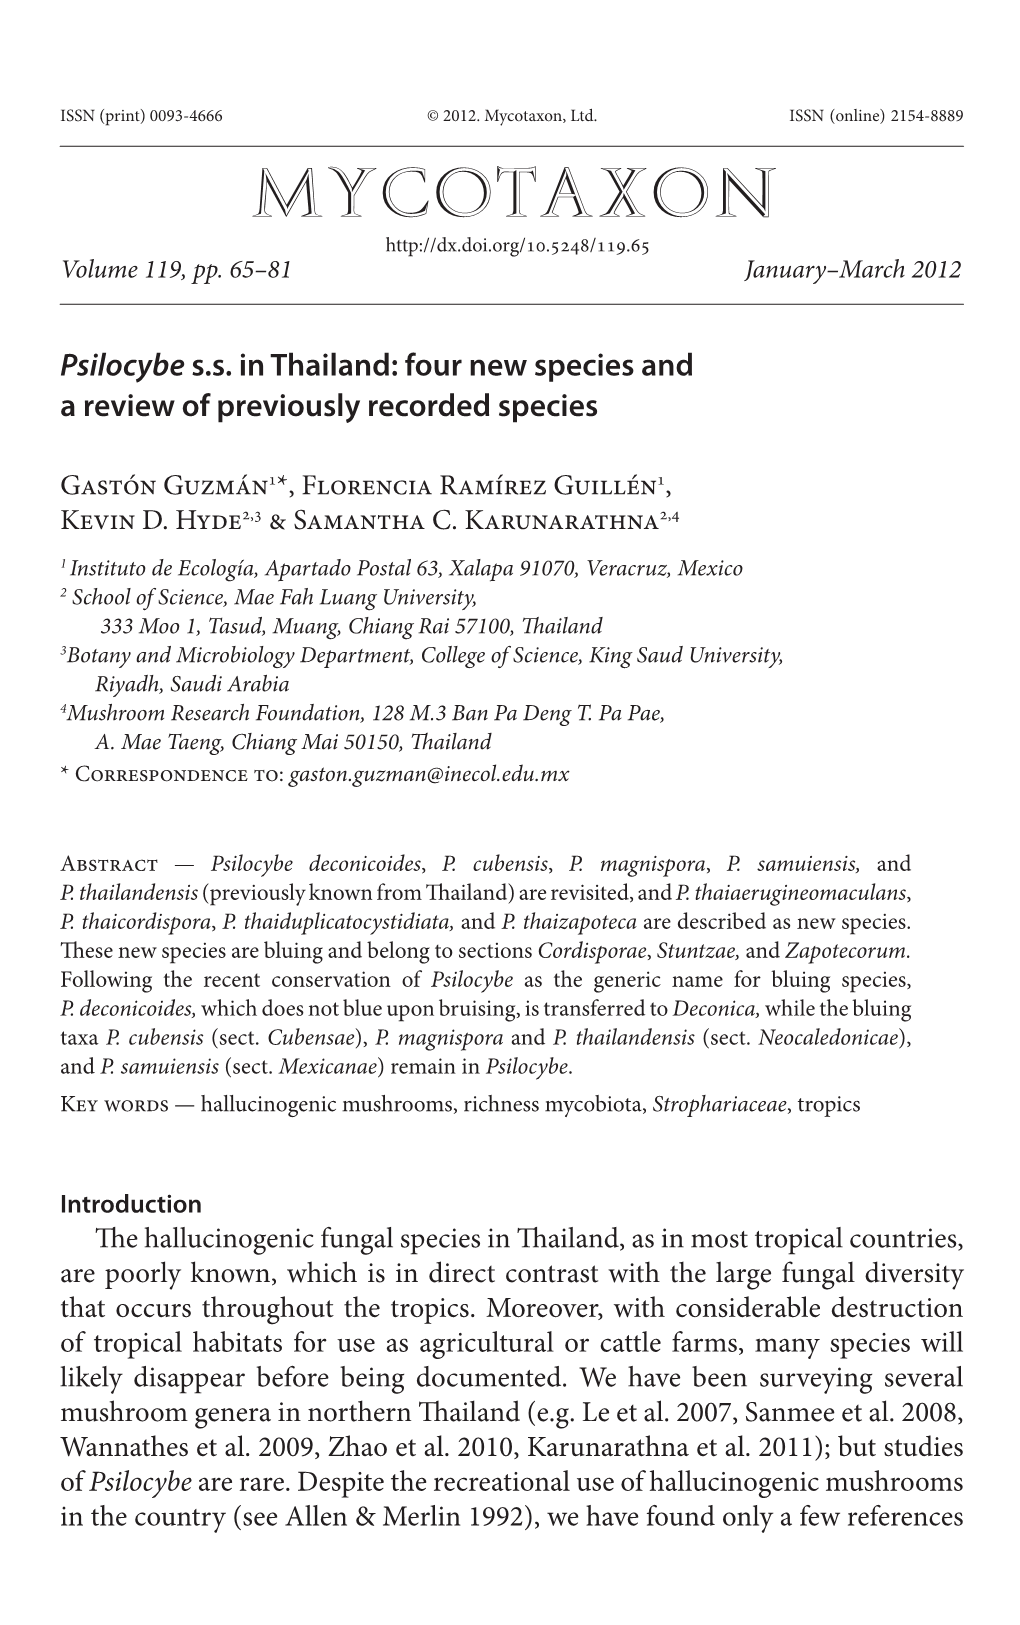 &lt;I&gt;Psilocybe&lt;/I&gt; S.S. in Thailand: Four New Species and a Review Of